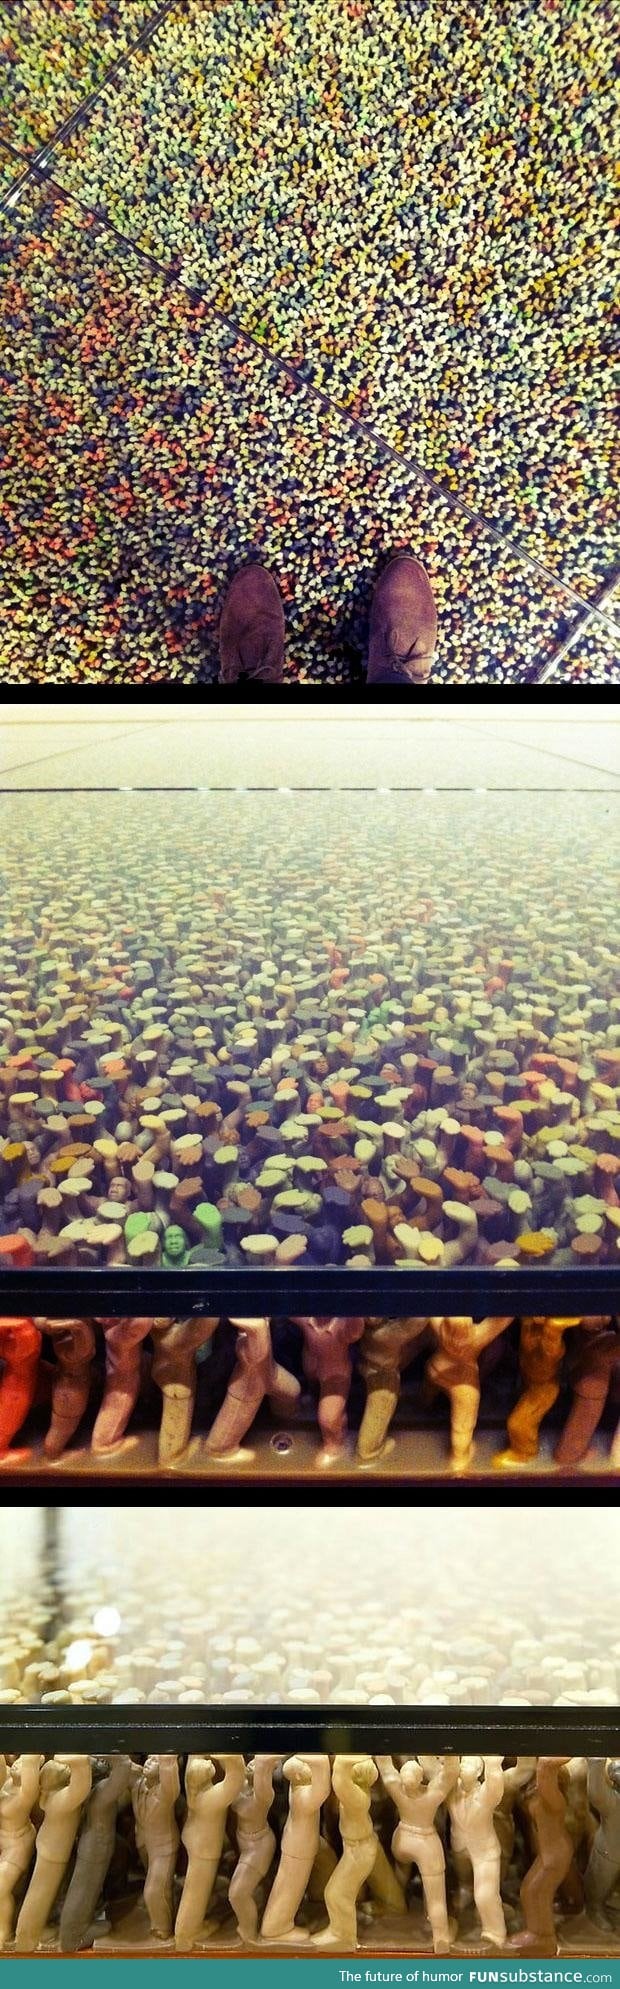 This glass floor is being held up by thousands of plastic toy figures